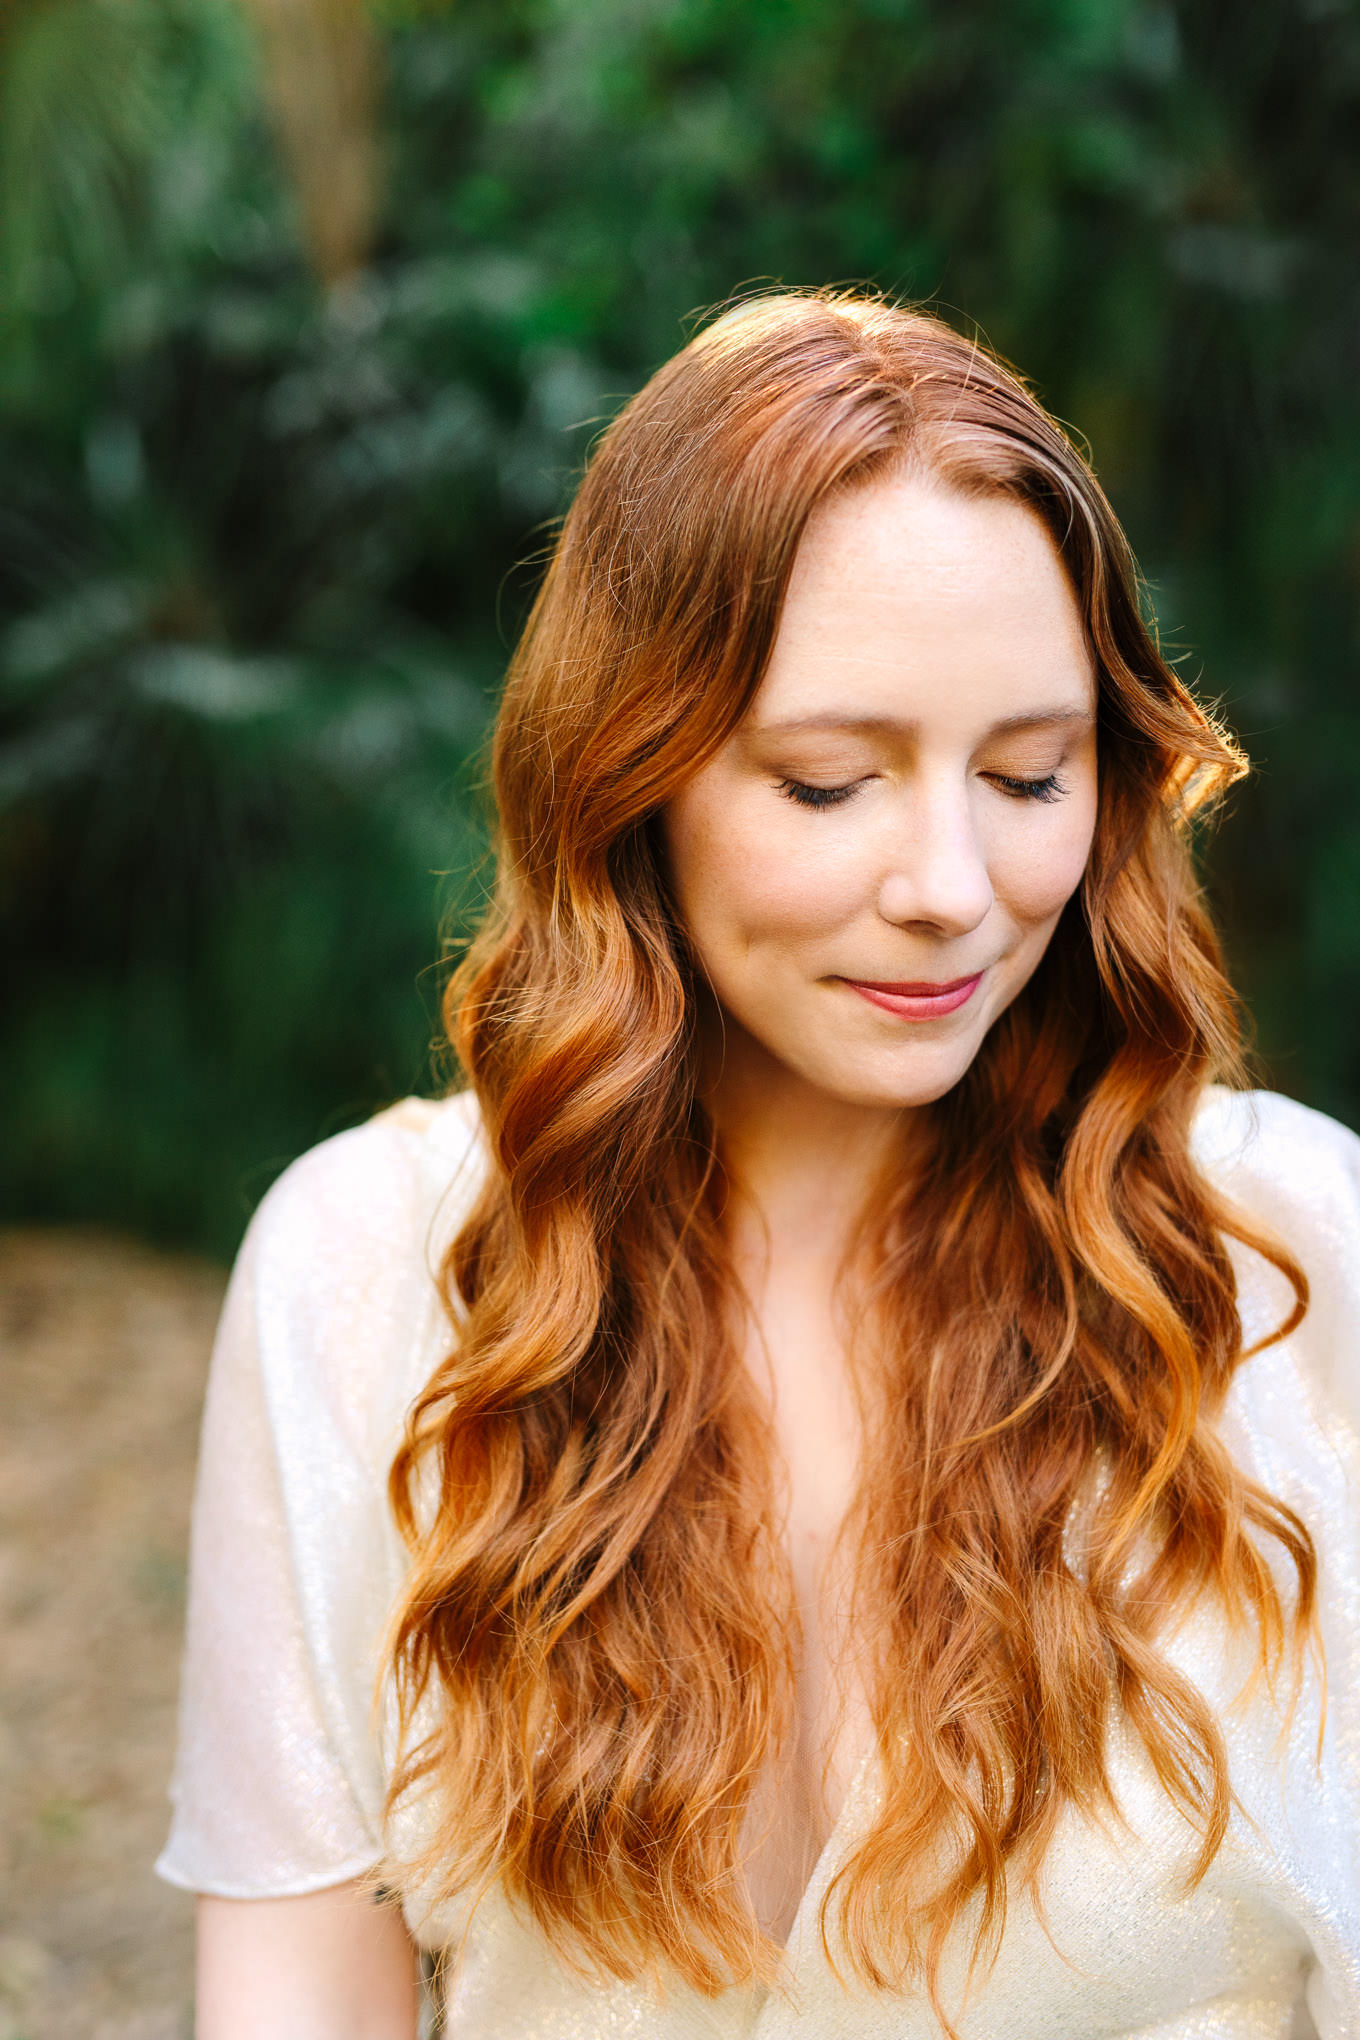 Bride with red wavy hair and natural makeup | Los Angeles Arboretum Elopement | Colorful and elevated wedding photography for fun-loving couples in Southern California | #LosAngelesElopement #elopement #LAarboretum #LAskyline #elopementphotos   Source: Mary Costa Photography | Los Angeles